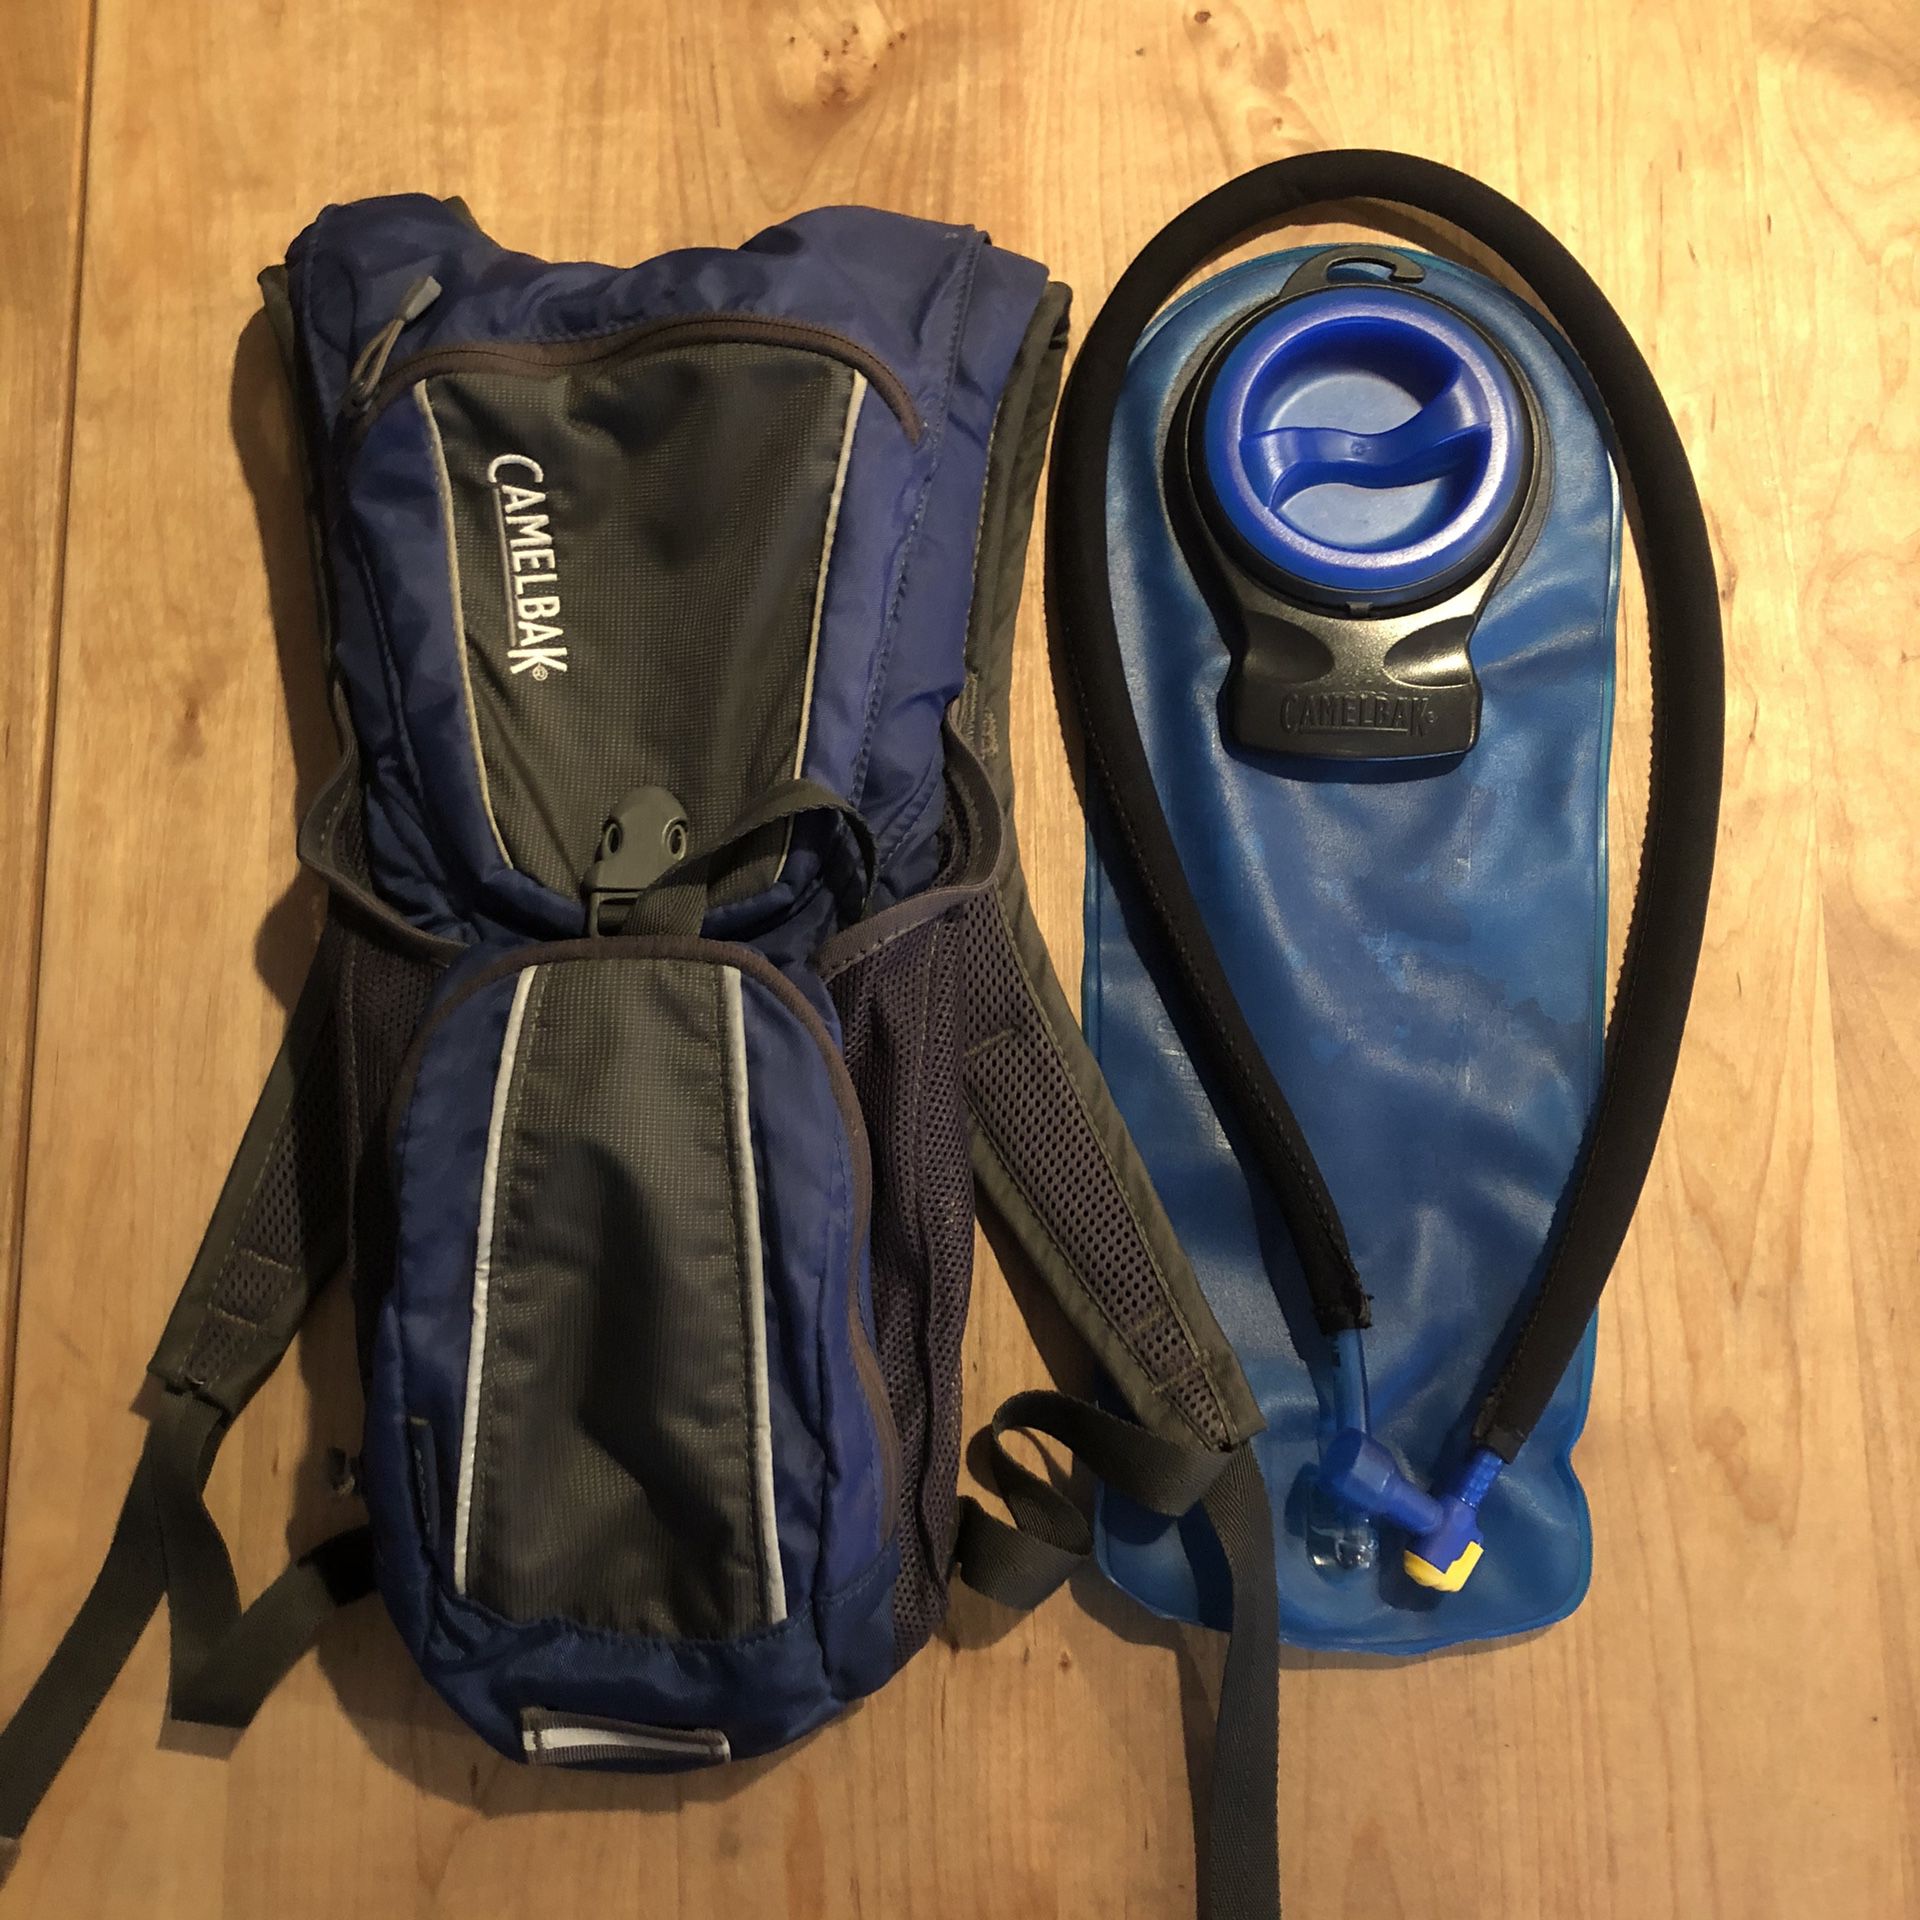 Camelbak Rogue Hydration Pack Good Condition!